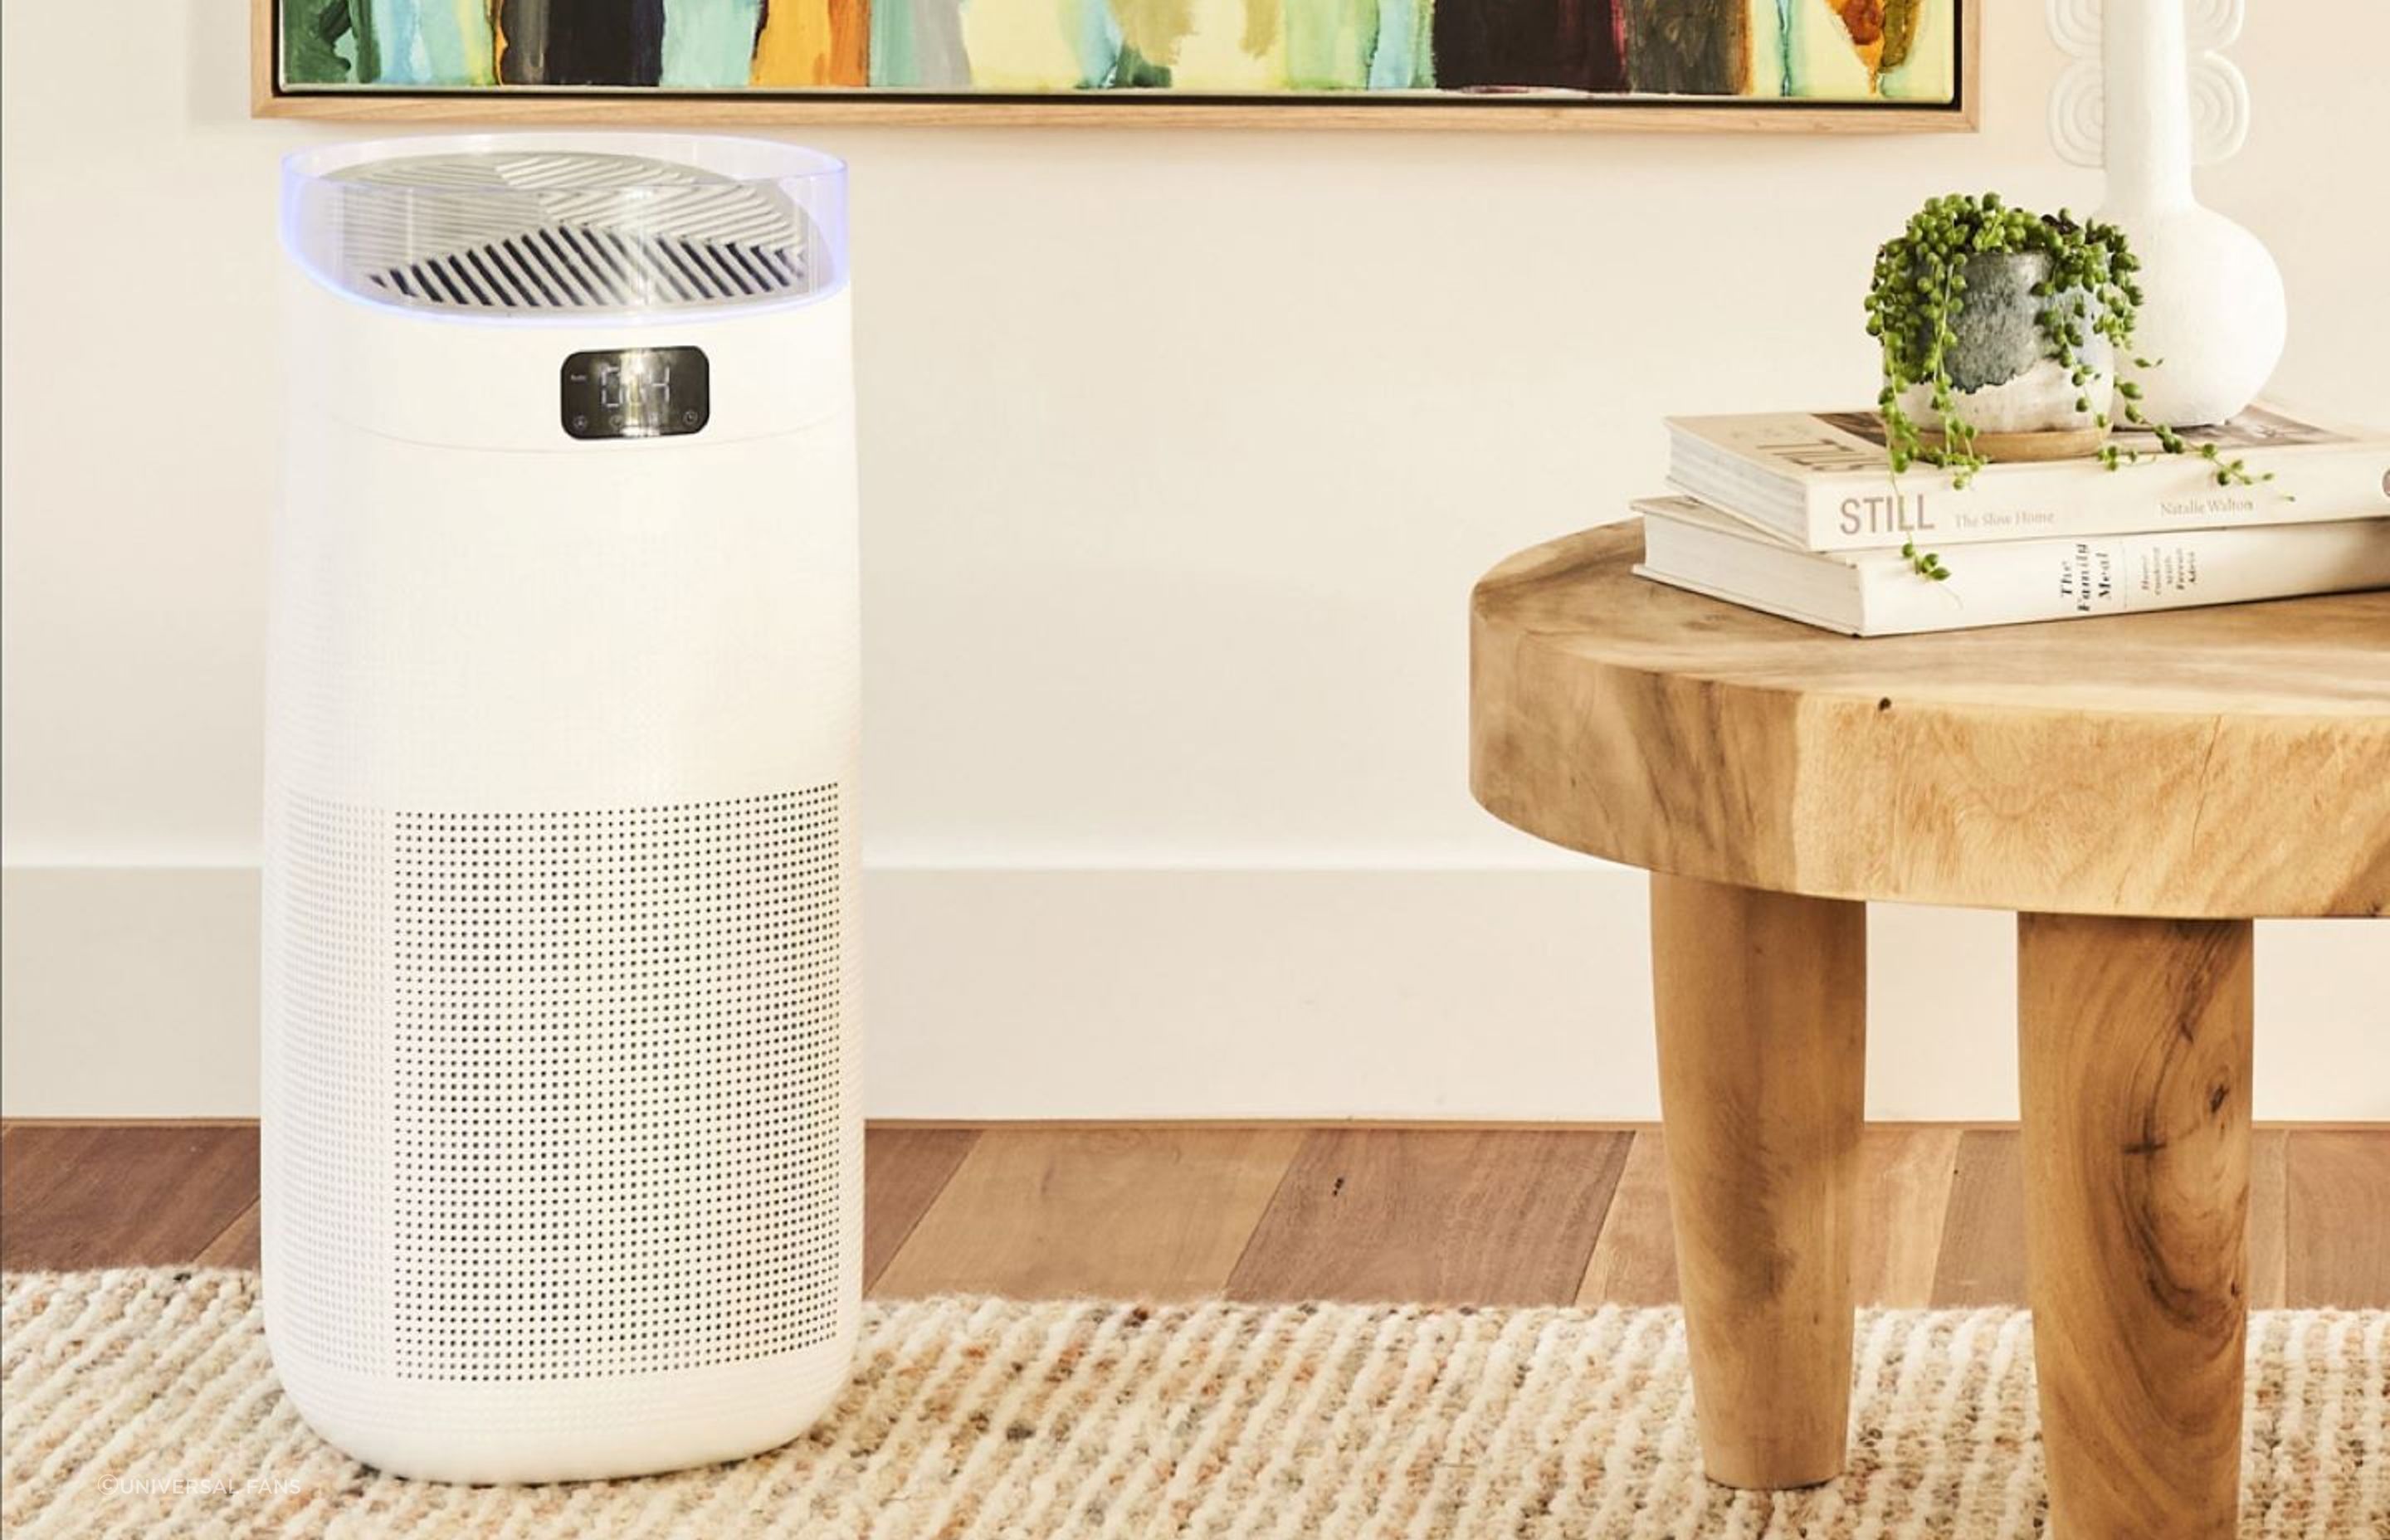 A smart air purifier can monitor air quality in real time.